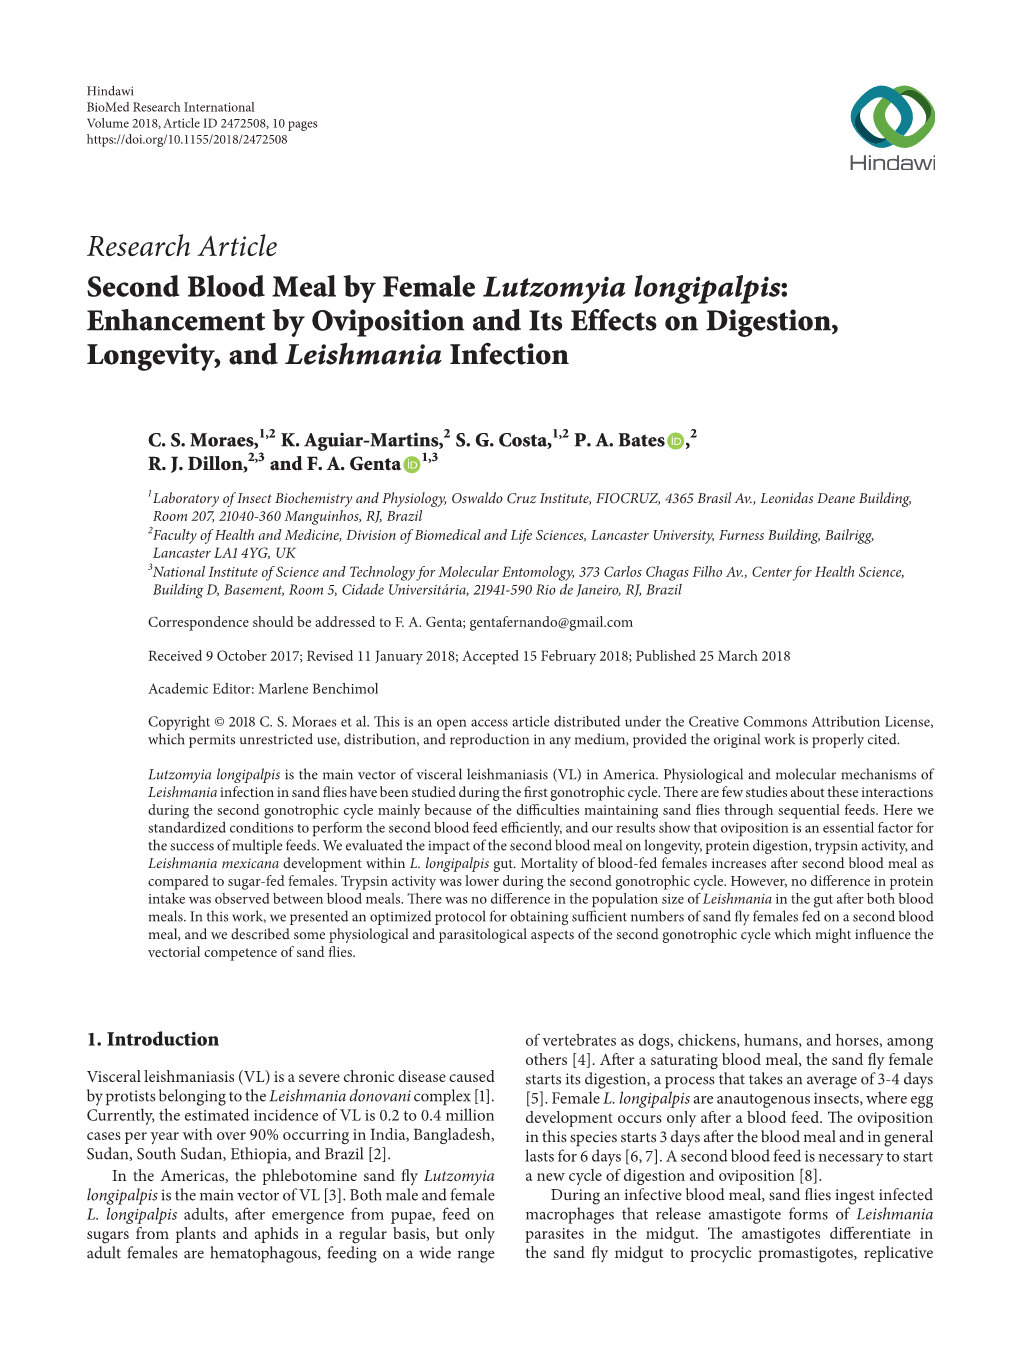 Second Blood Meal by Female Lutzomyia Longipalpis: Enhancement by Oviposition and Its Effects on Digestion, Longevity, and Leishmania Infection